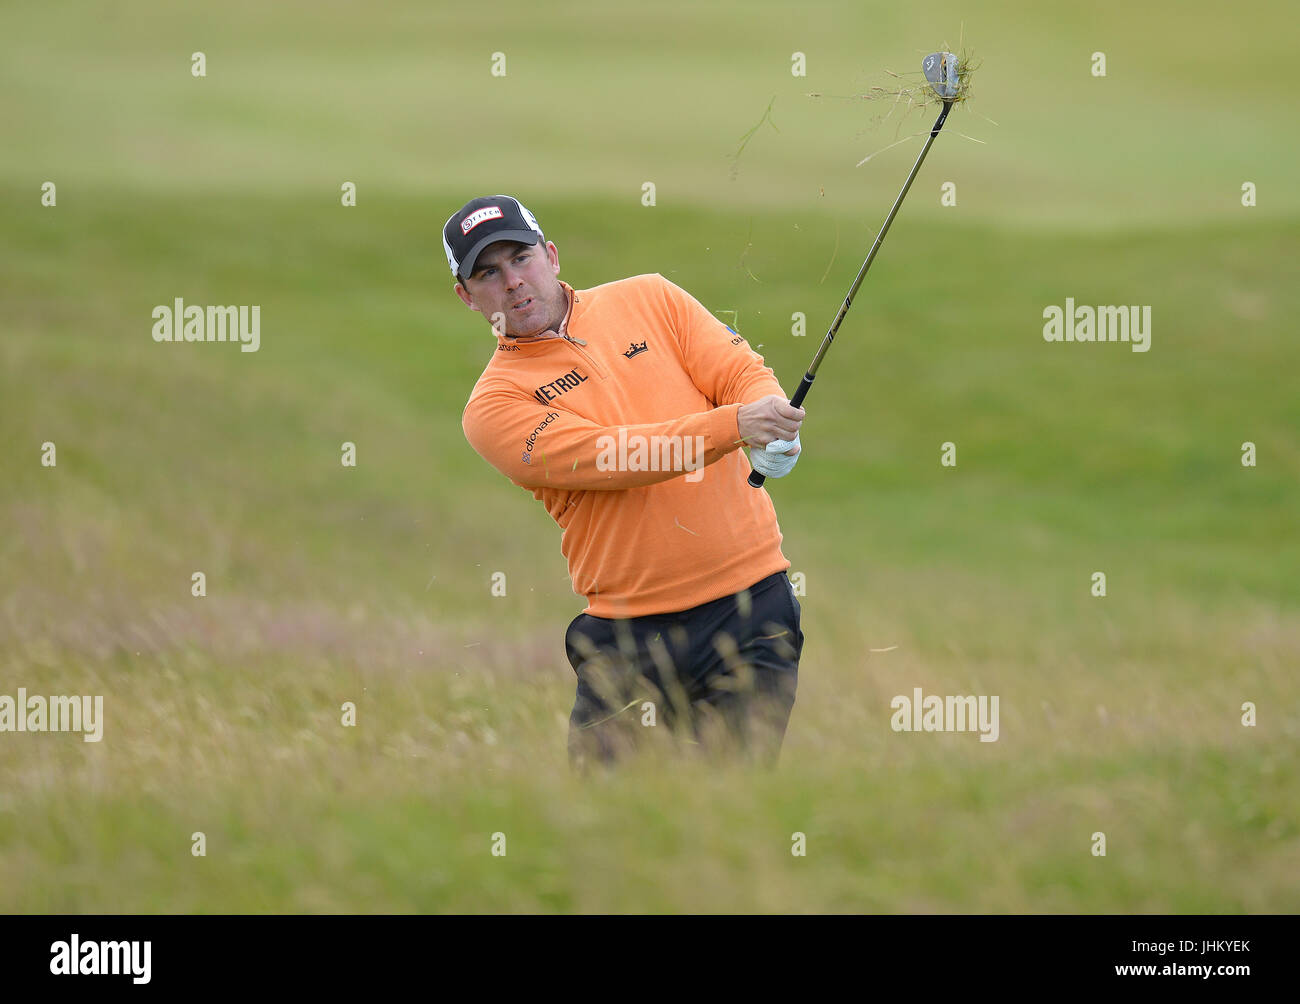 Scotland's Richie Ramsay plays his second shot at the 13th hole during day two of the 2017 Aberdeen Asset Management Scottish Open at Dundonald Links, Troon. PRESS ASSOCIATION Photo. Picture date: Friday July 14, 2017. See PA story Golf Scottish. Photo credit should read: Mark Runnacles/PA Wire. RESTRICTIONS: Editorial use only. No commercial use. Stock Photo